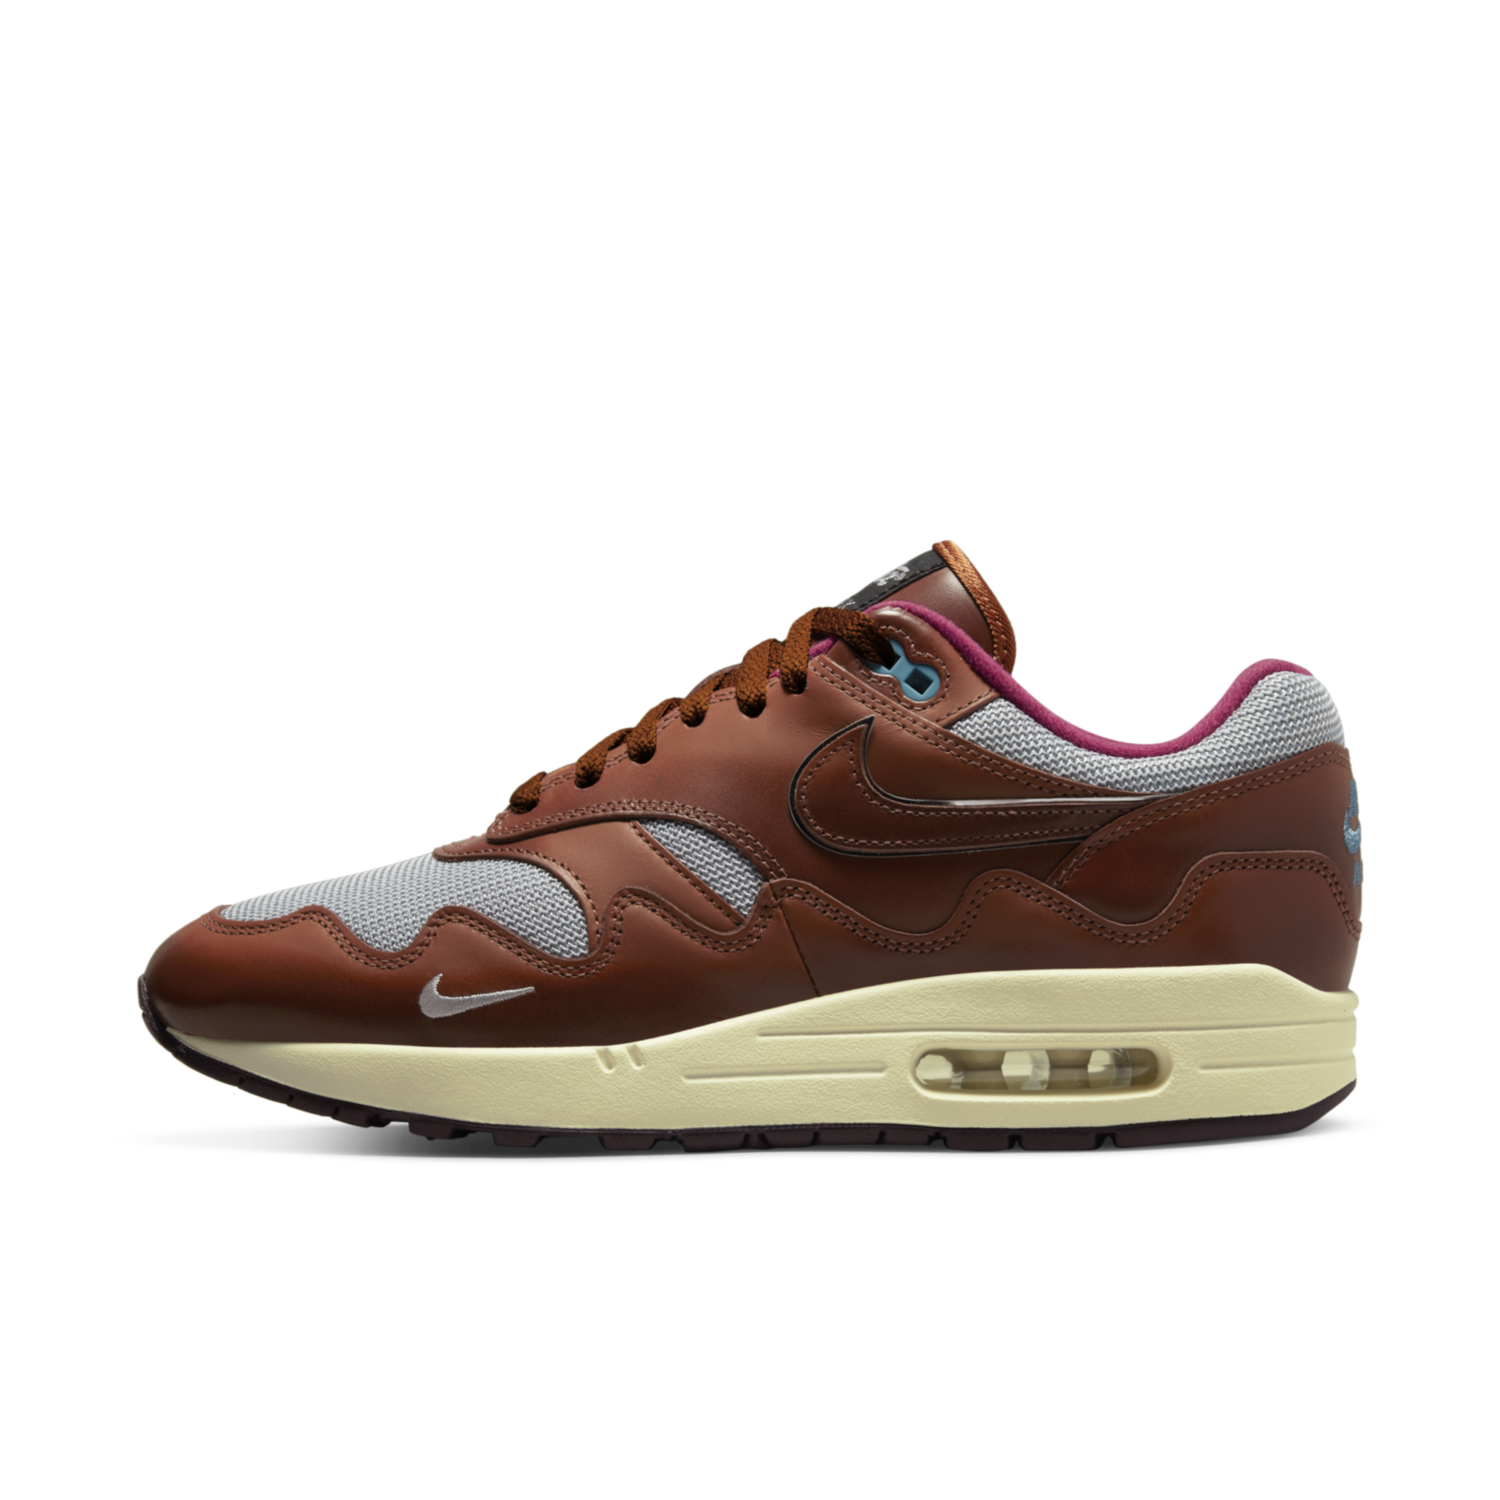 Patta x Nike Air Max 1 'Dark Russet' most wanted sneaker releases